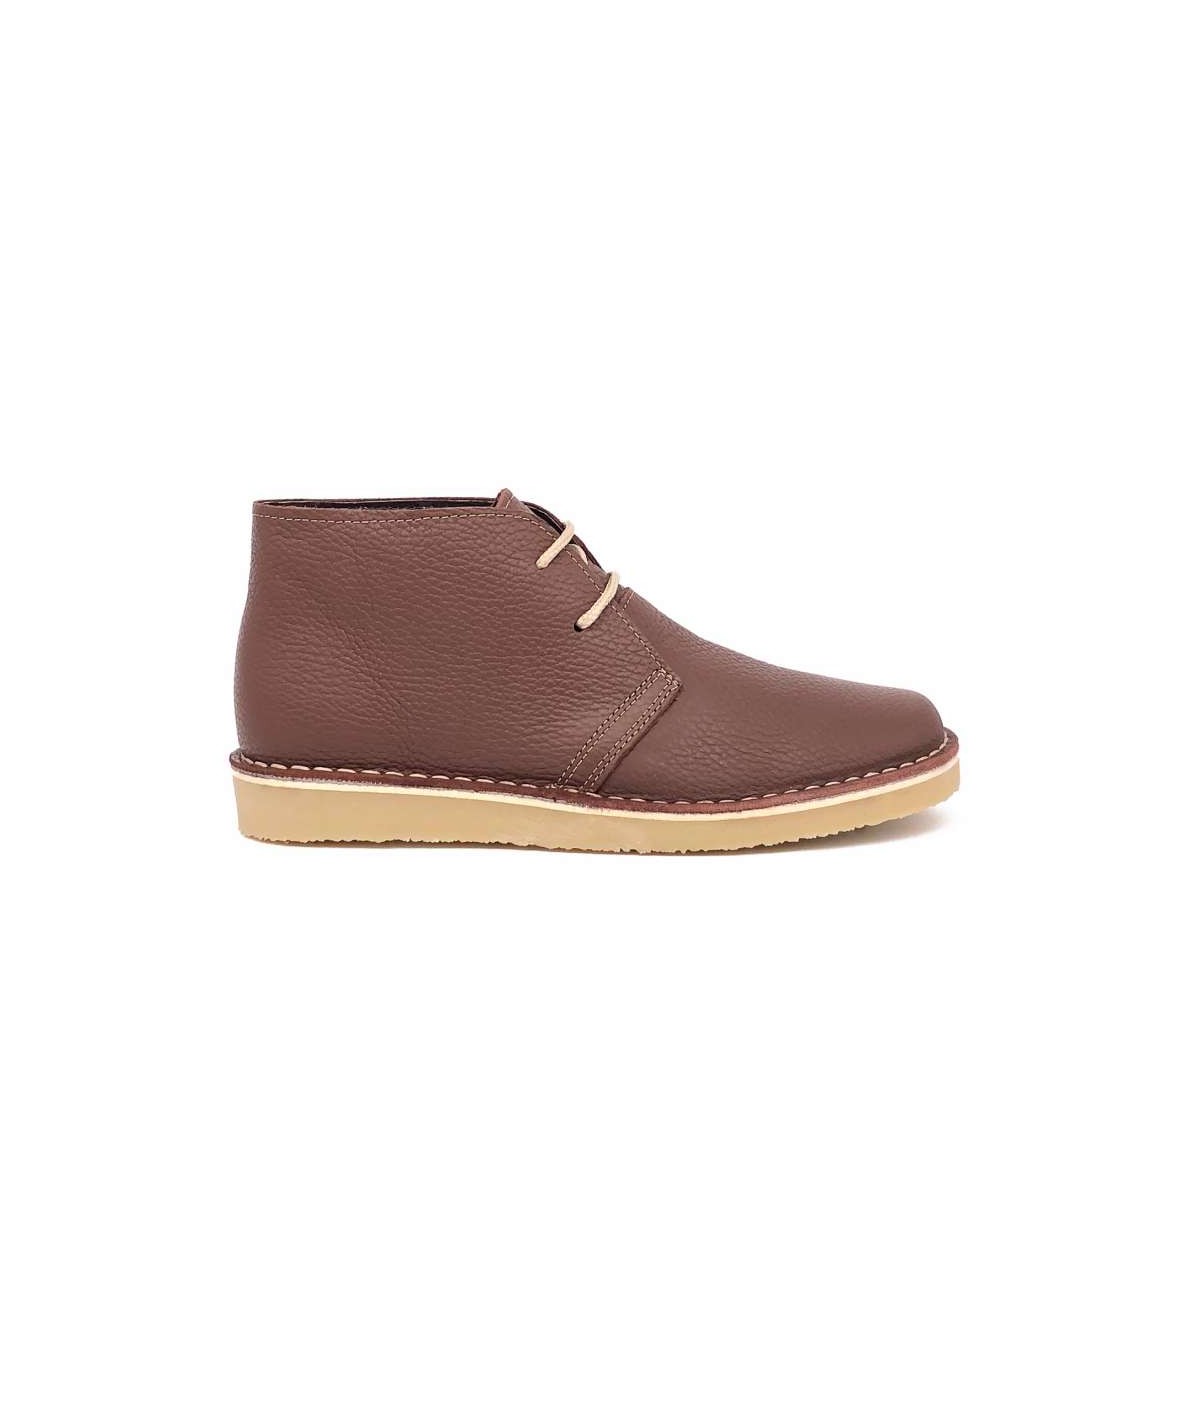 Desert boots with Dover sole in brown Silk nappa for men